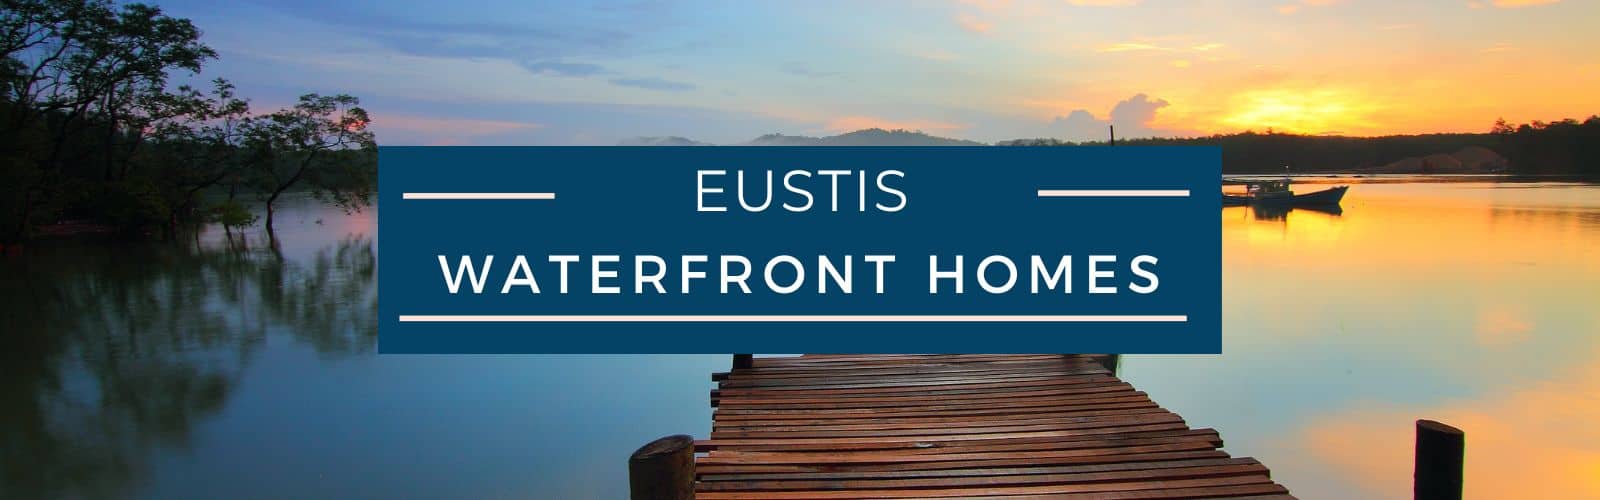 Waterfront Homes for Sale in Eustis FL